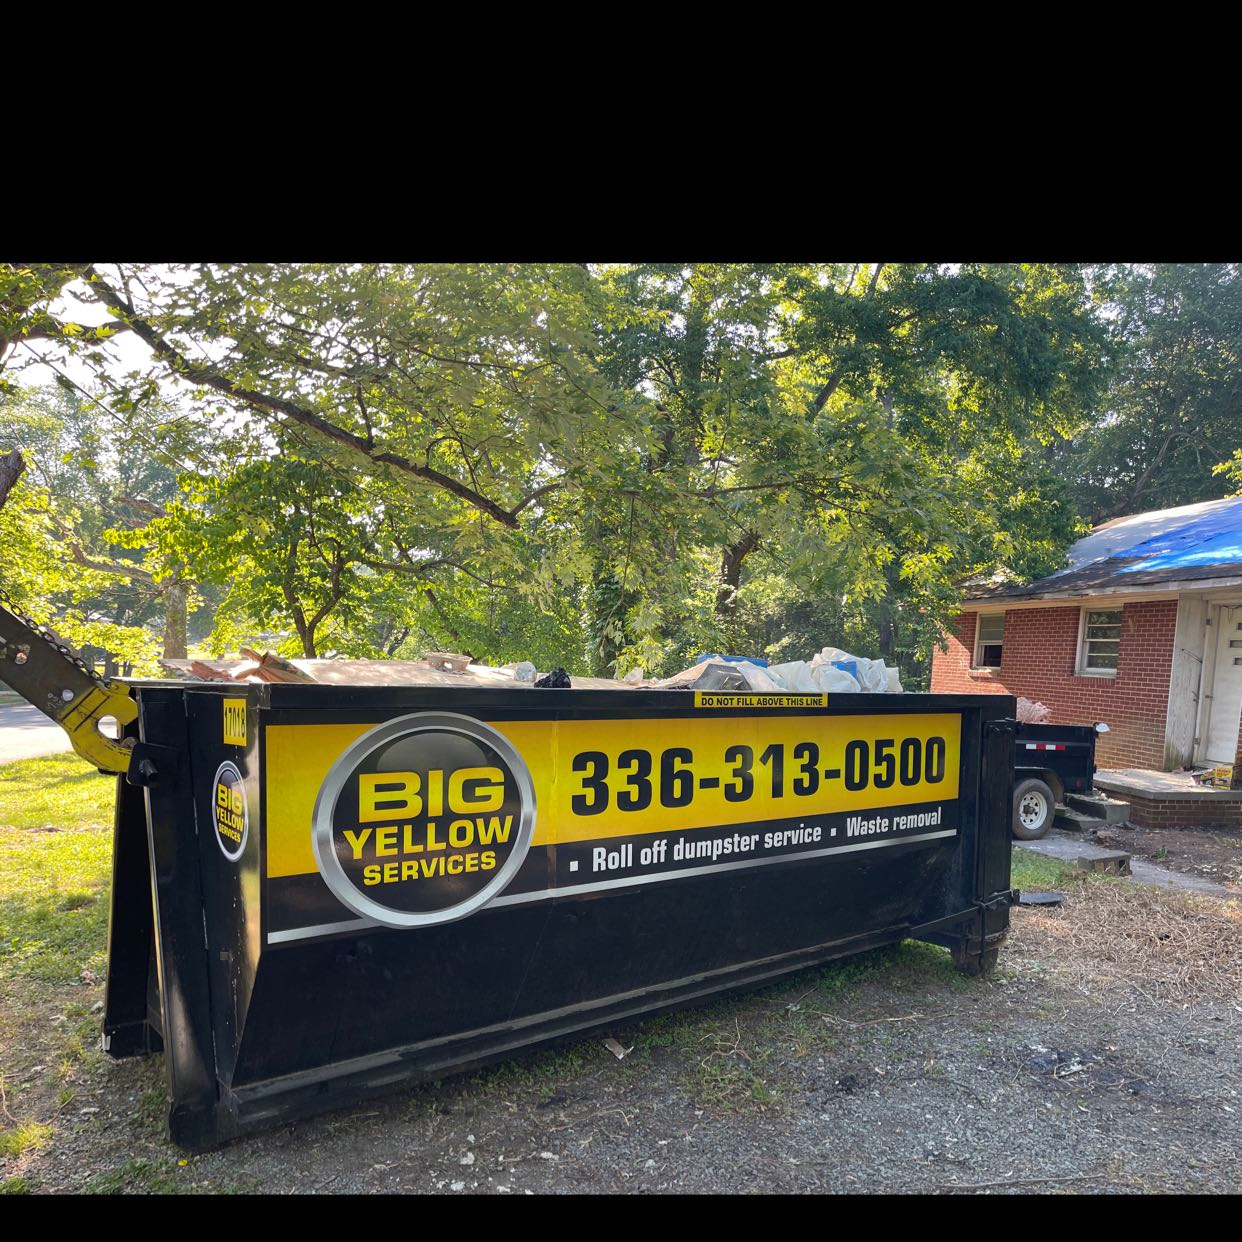 A-1933 Wilkins Street Burlington, NC 27217 Privacy Policy | Roll-Off Dumpster and Portable Toilet Rentals | Big Yellow Services, LLC